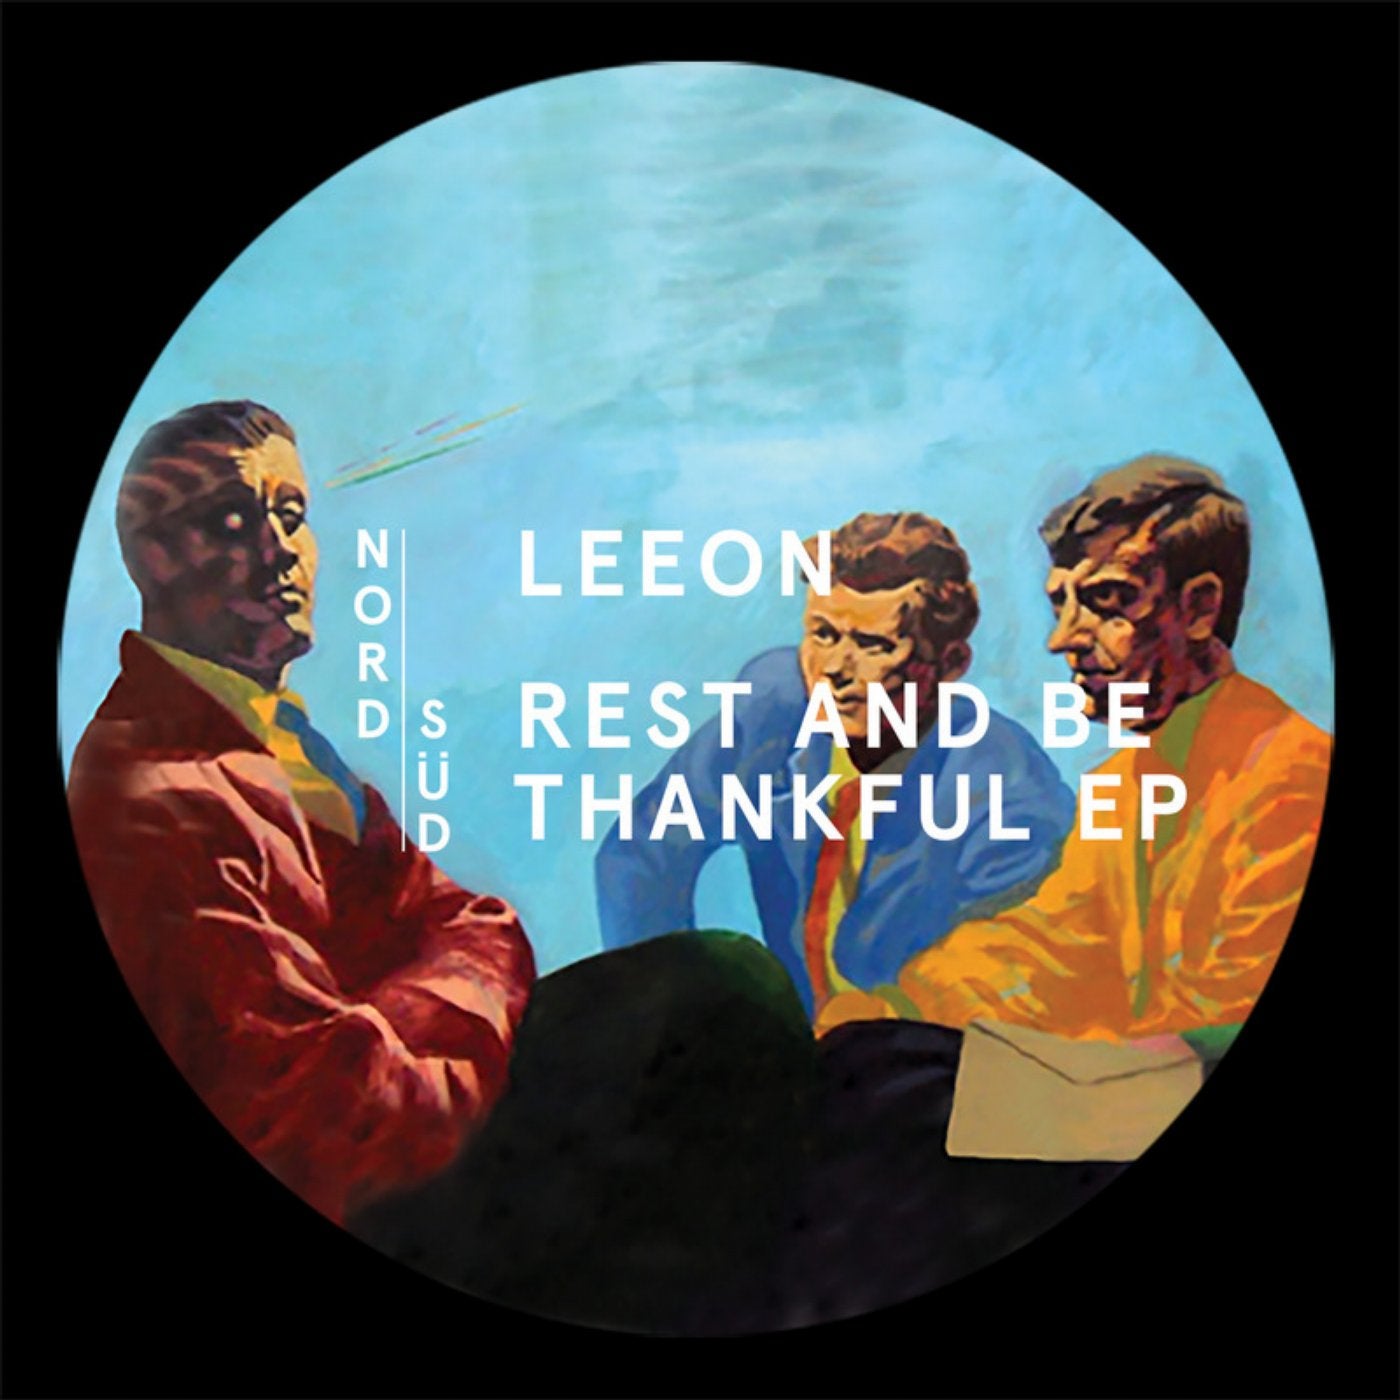 Rest and Be Thankful EP